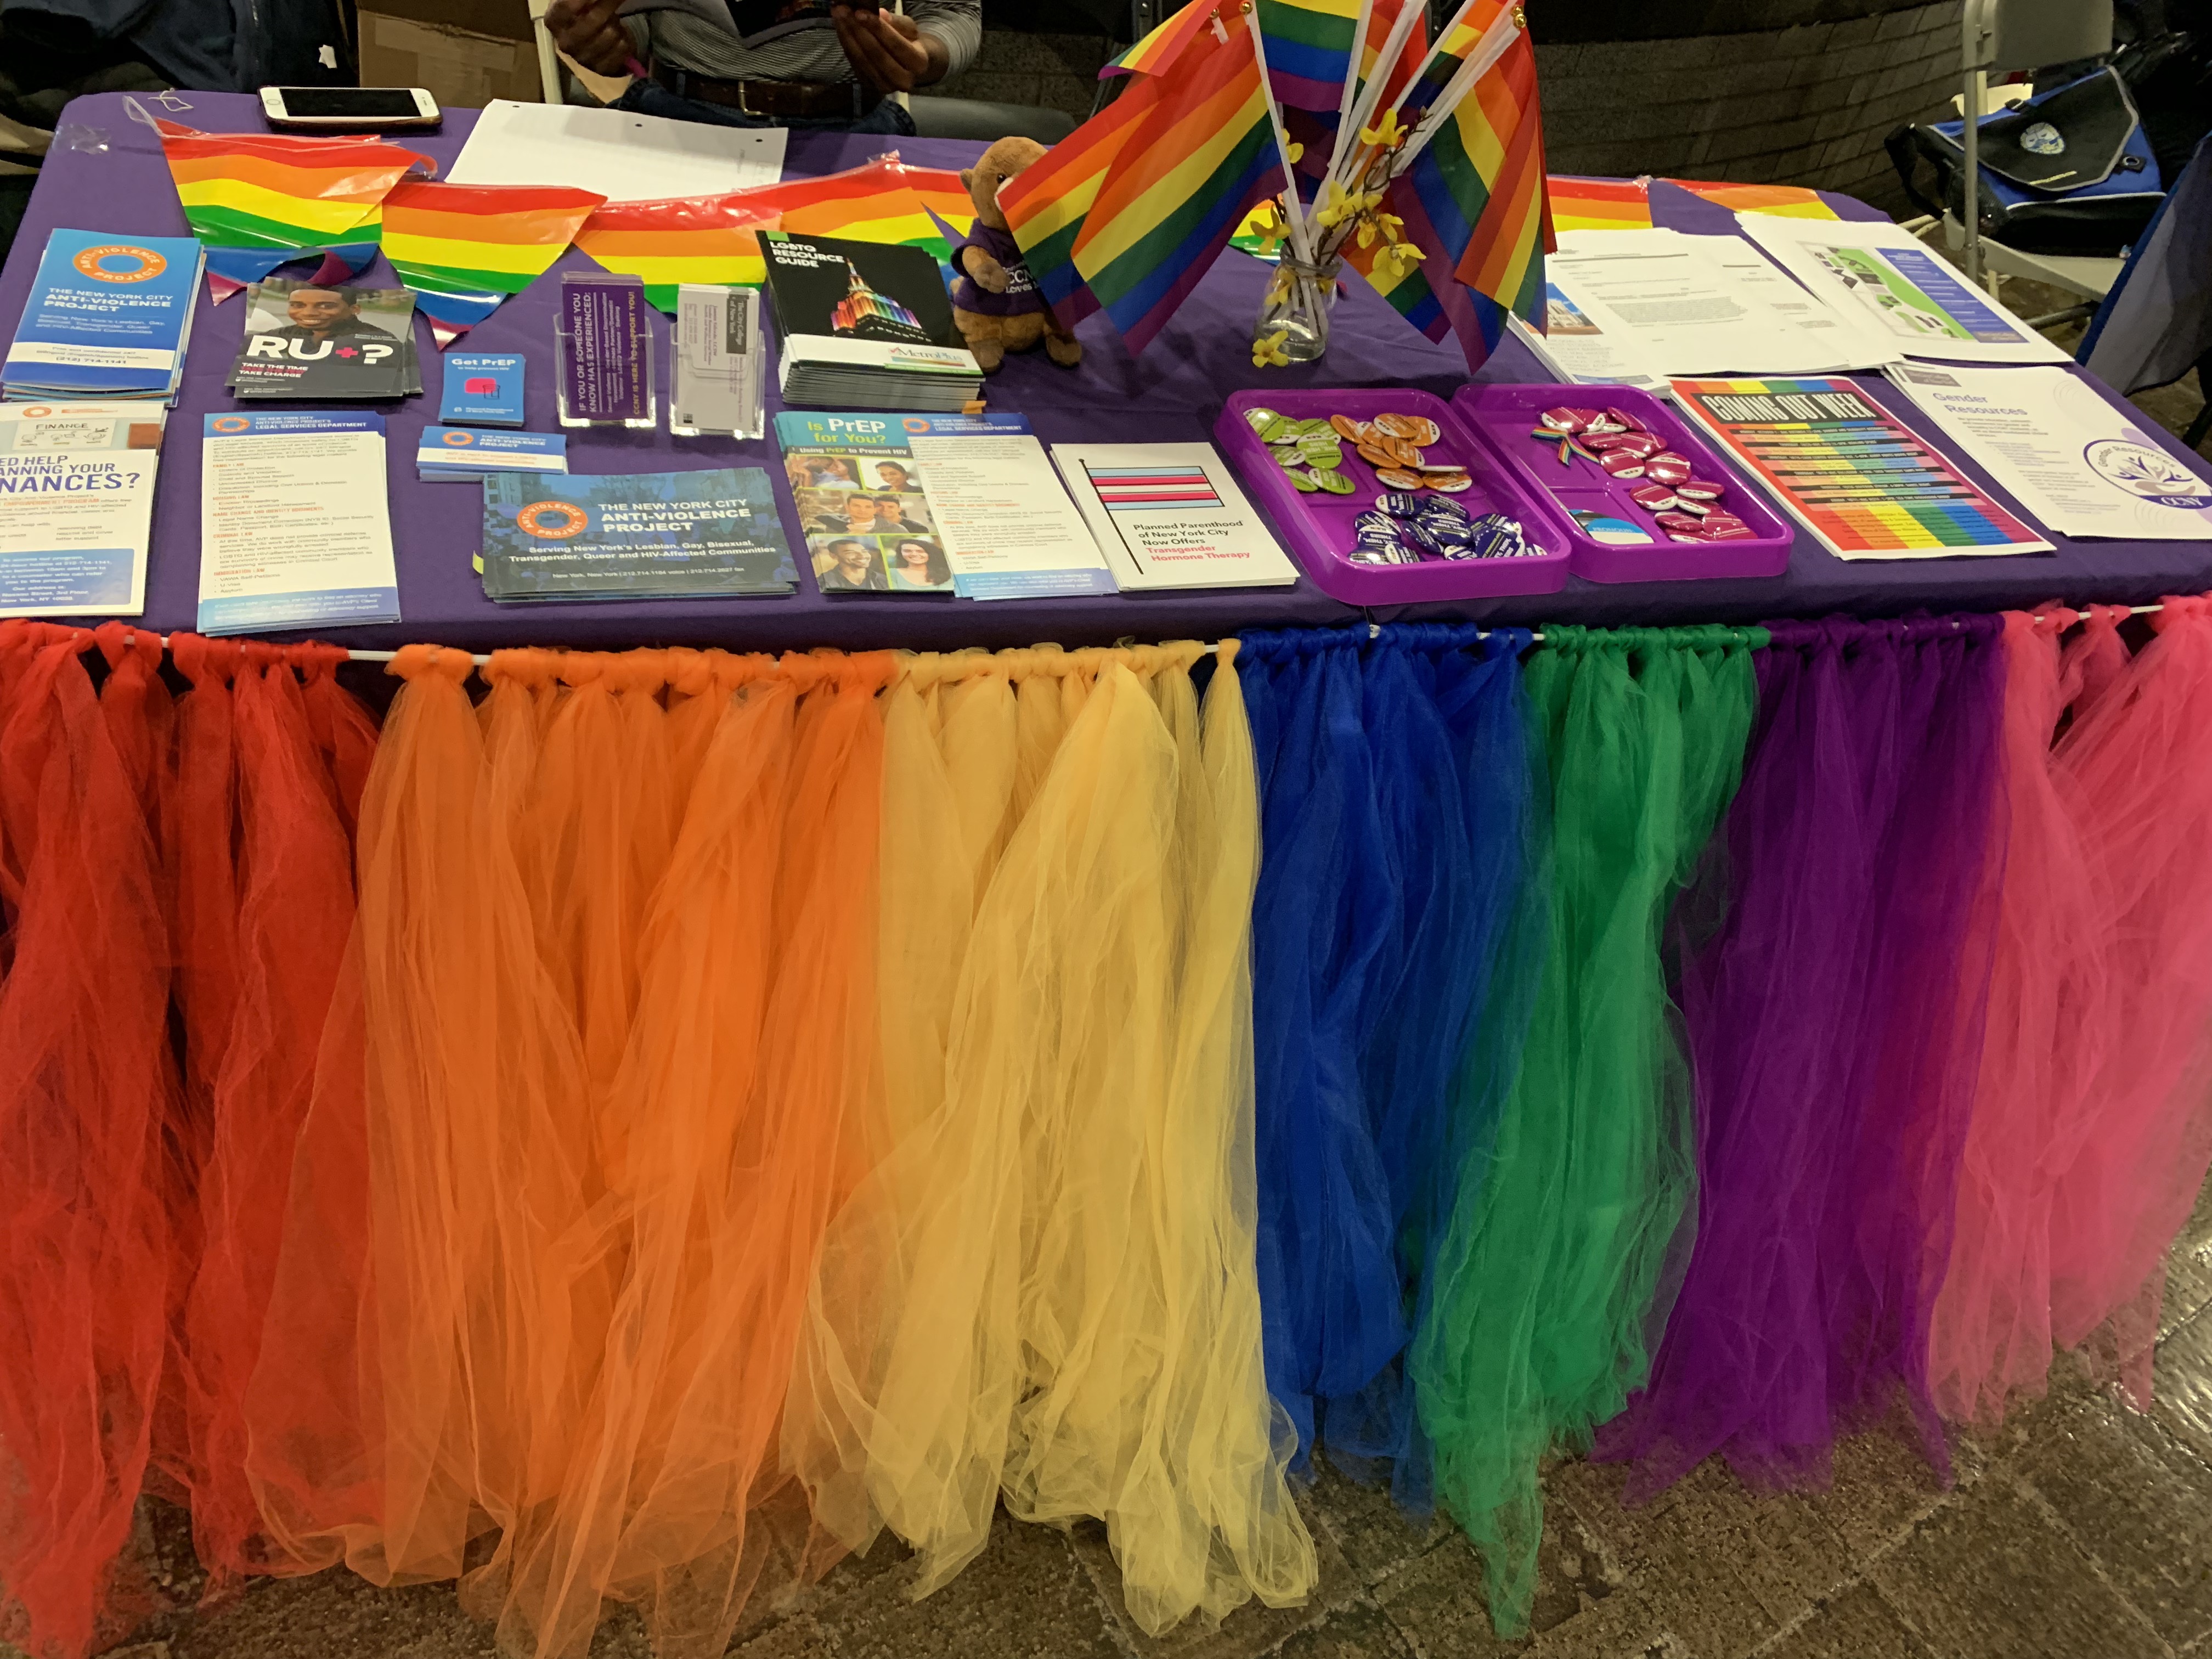 This image showcases a table display from CCNYs 'Coming out Week' event. The table is full of the rainbow colors of the pride flag, and includes pamphlets and fliers of different resources.